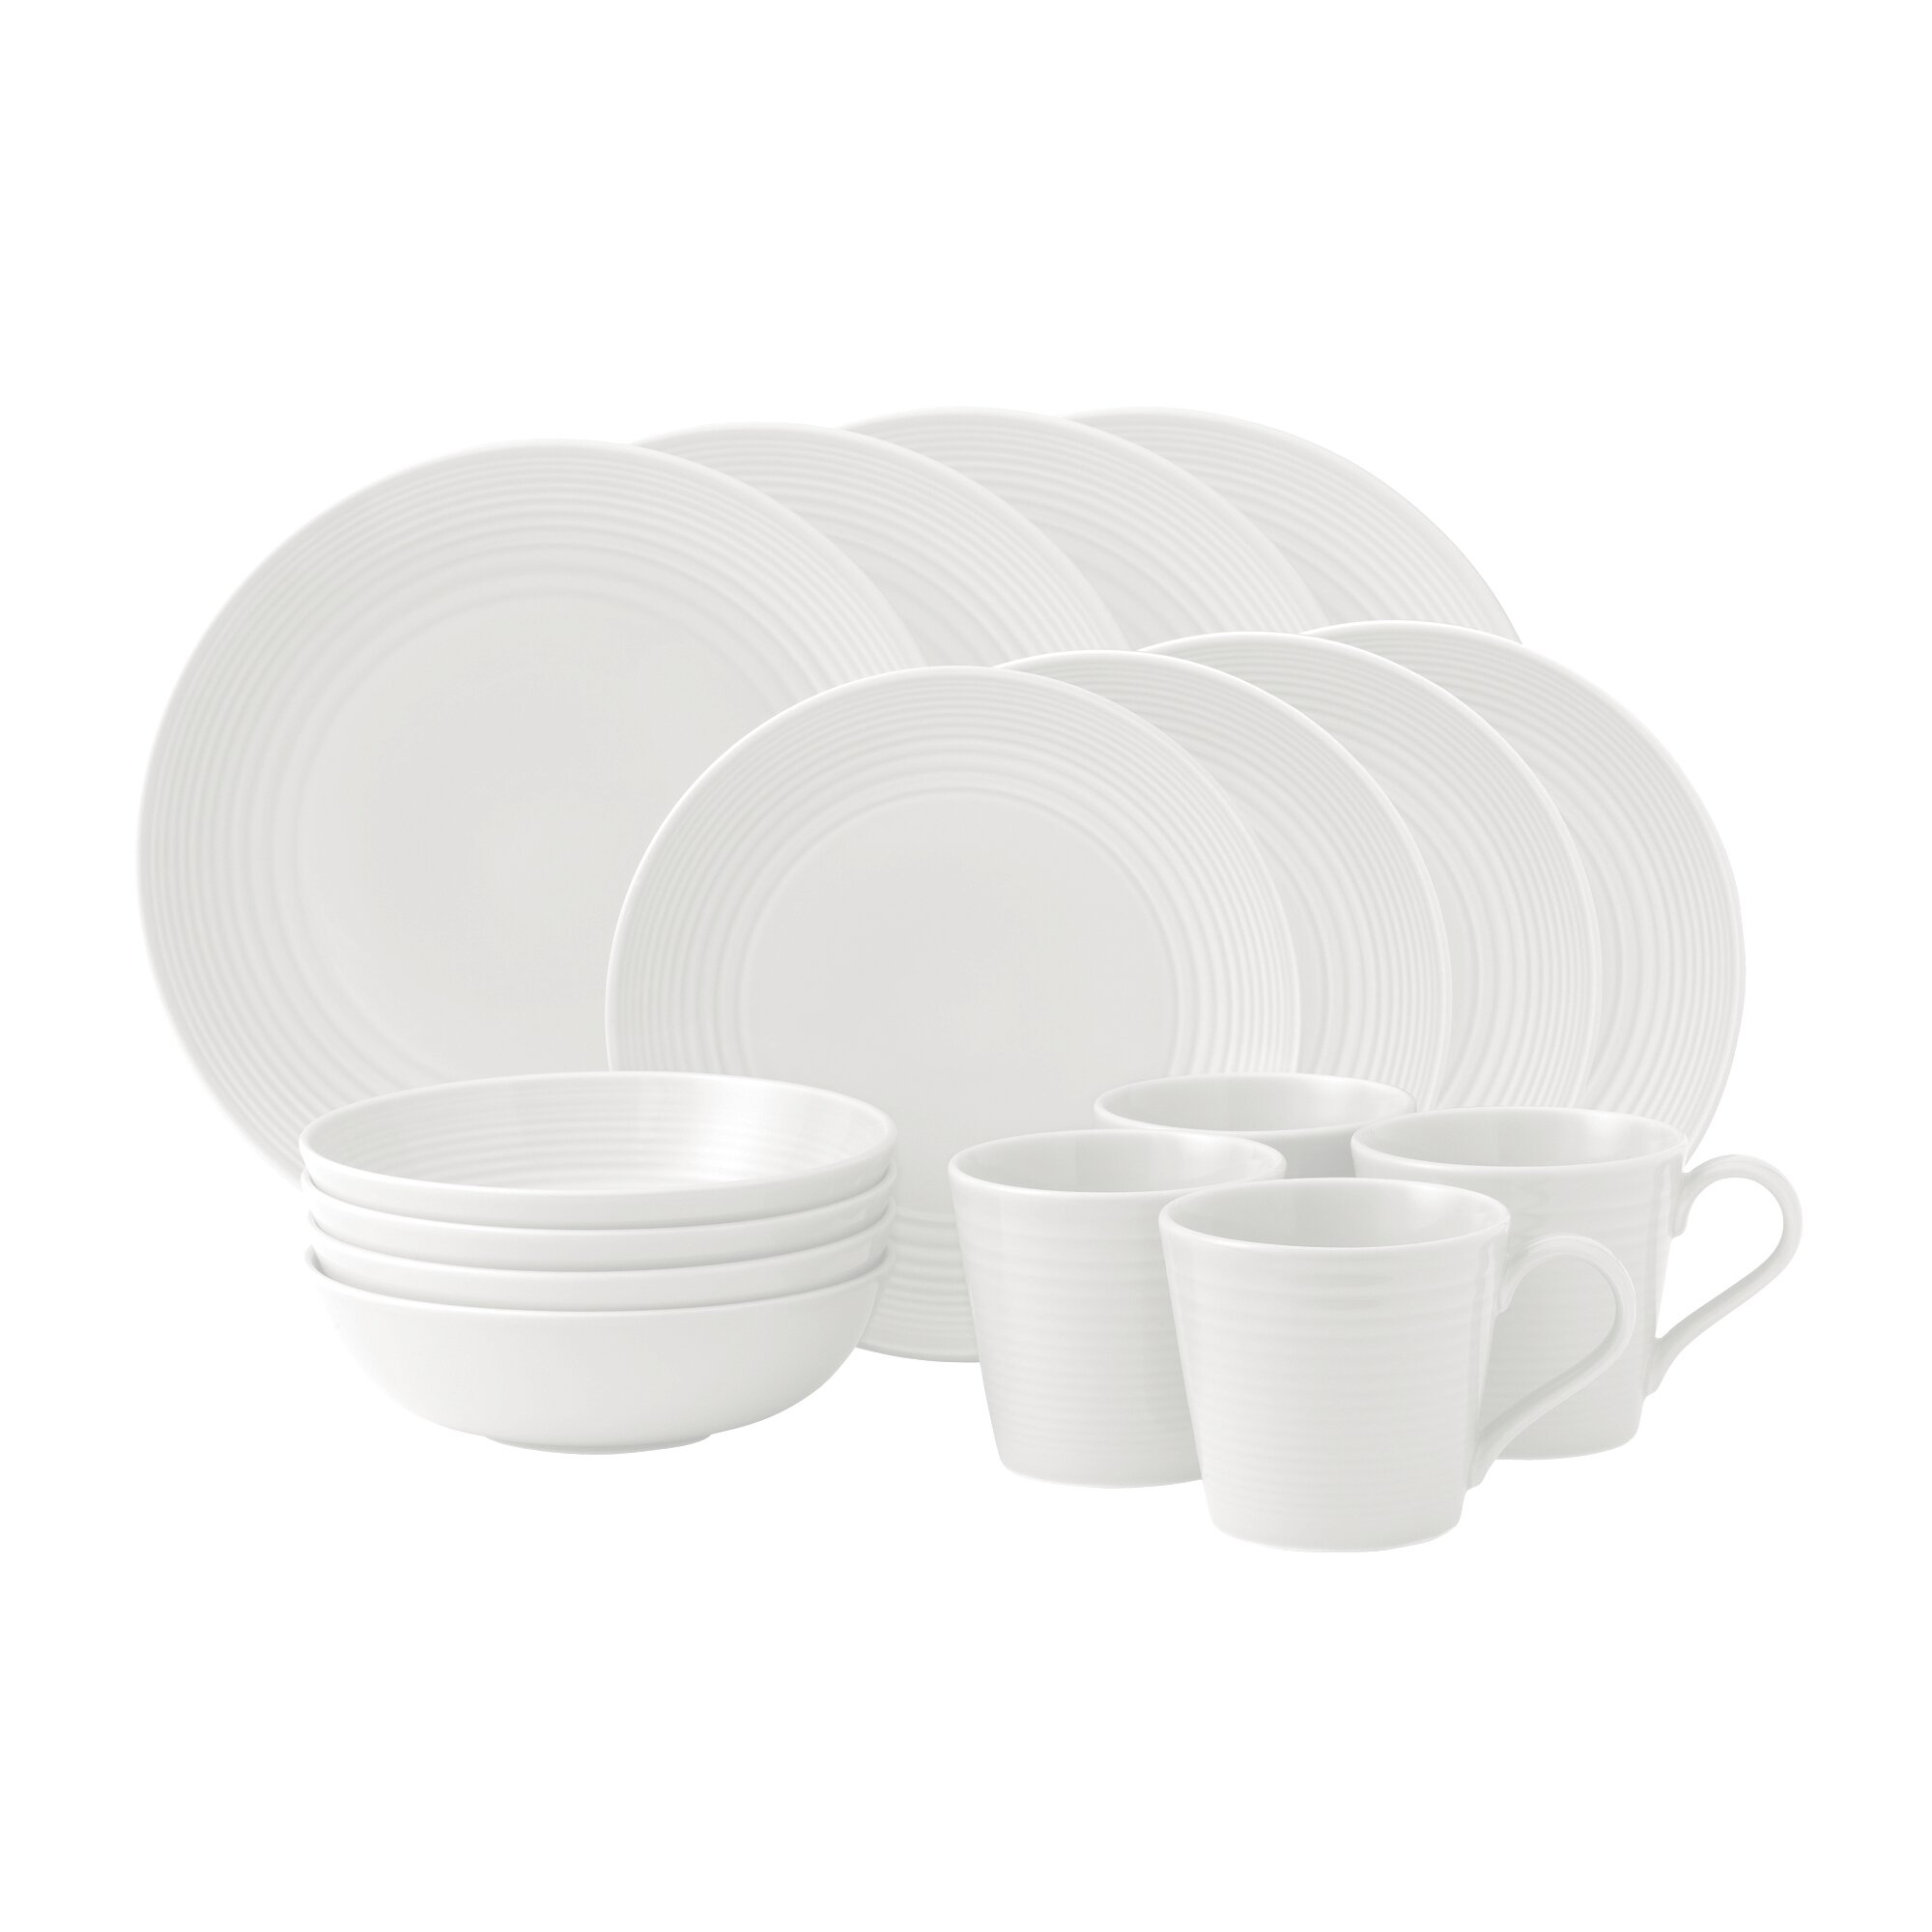 Gordon Ramsay Royal Doulton Exclusively For Dinnerware Set - Service for 4 & Reviews | Wayfair